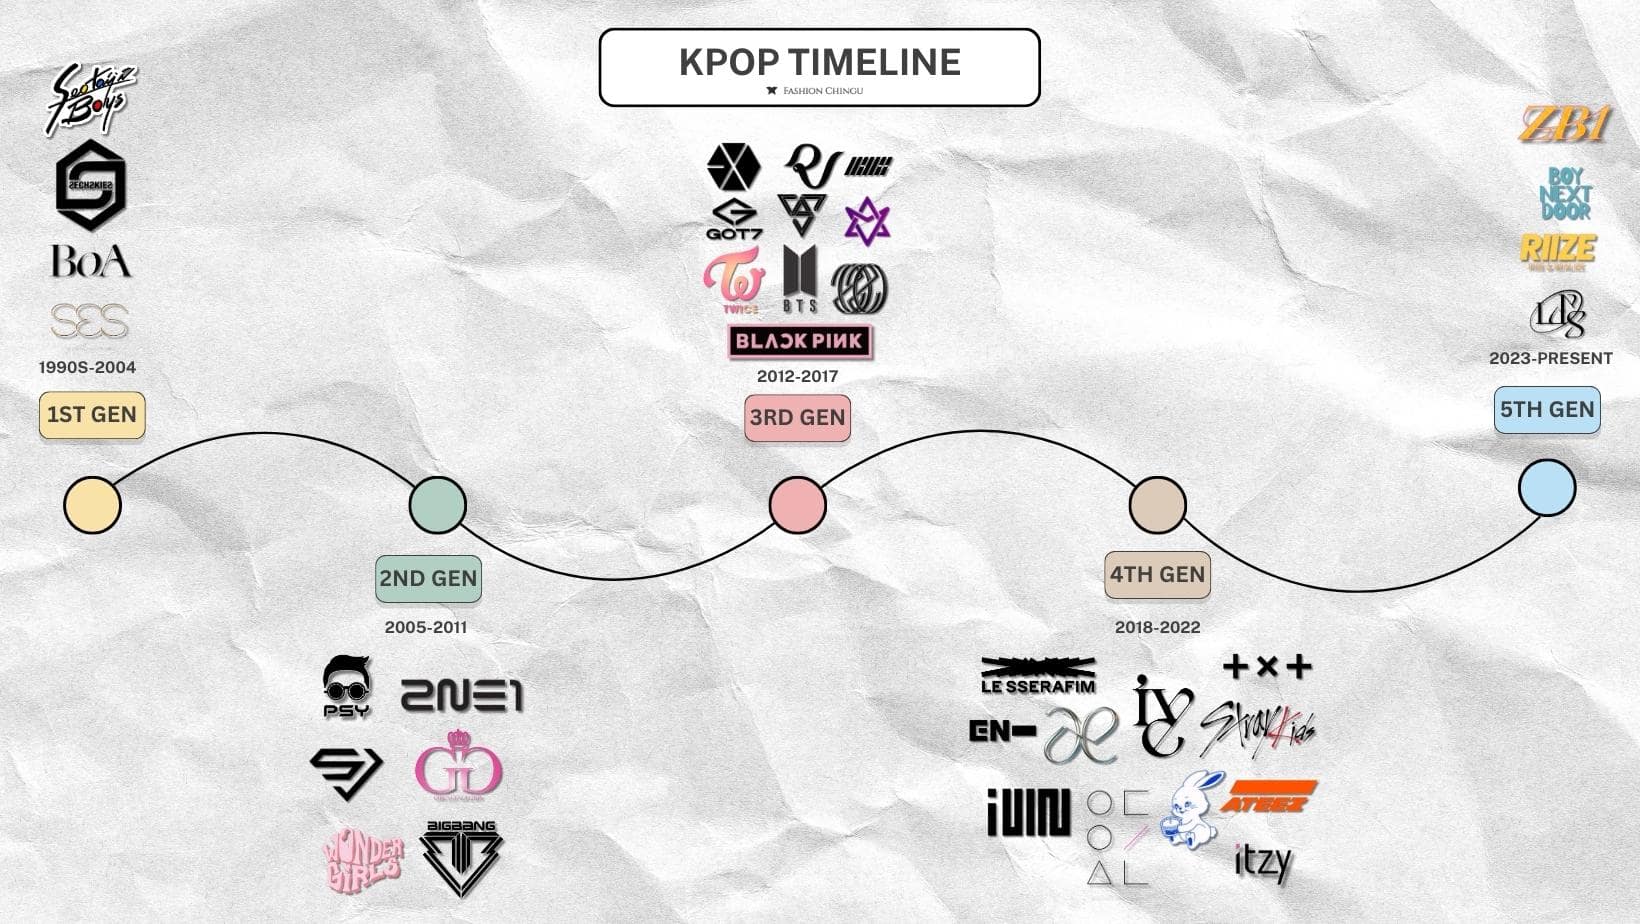 1st to 5th KPOP Generation: A Deep Dive